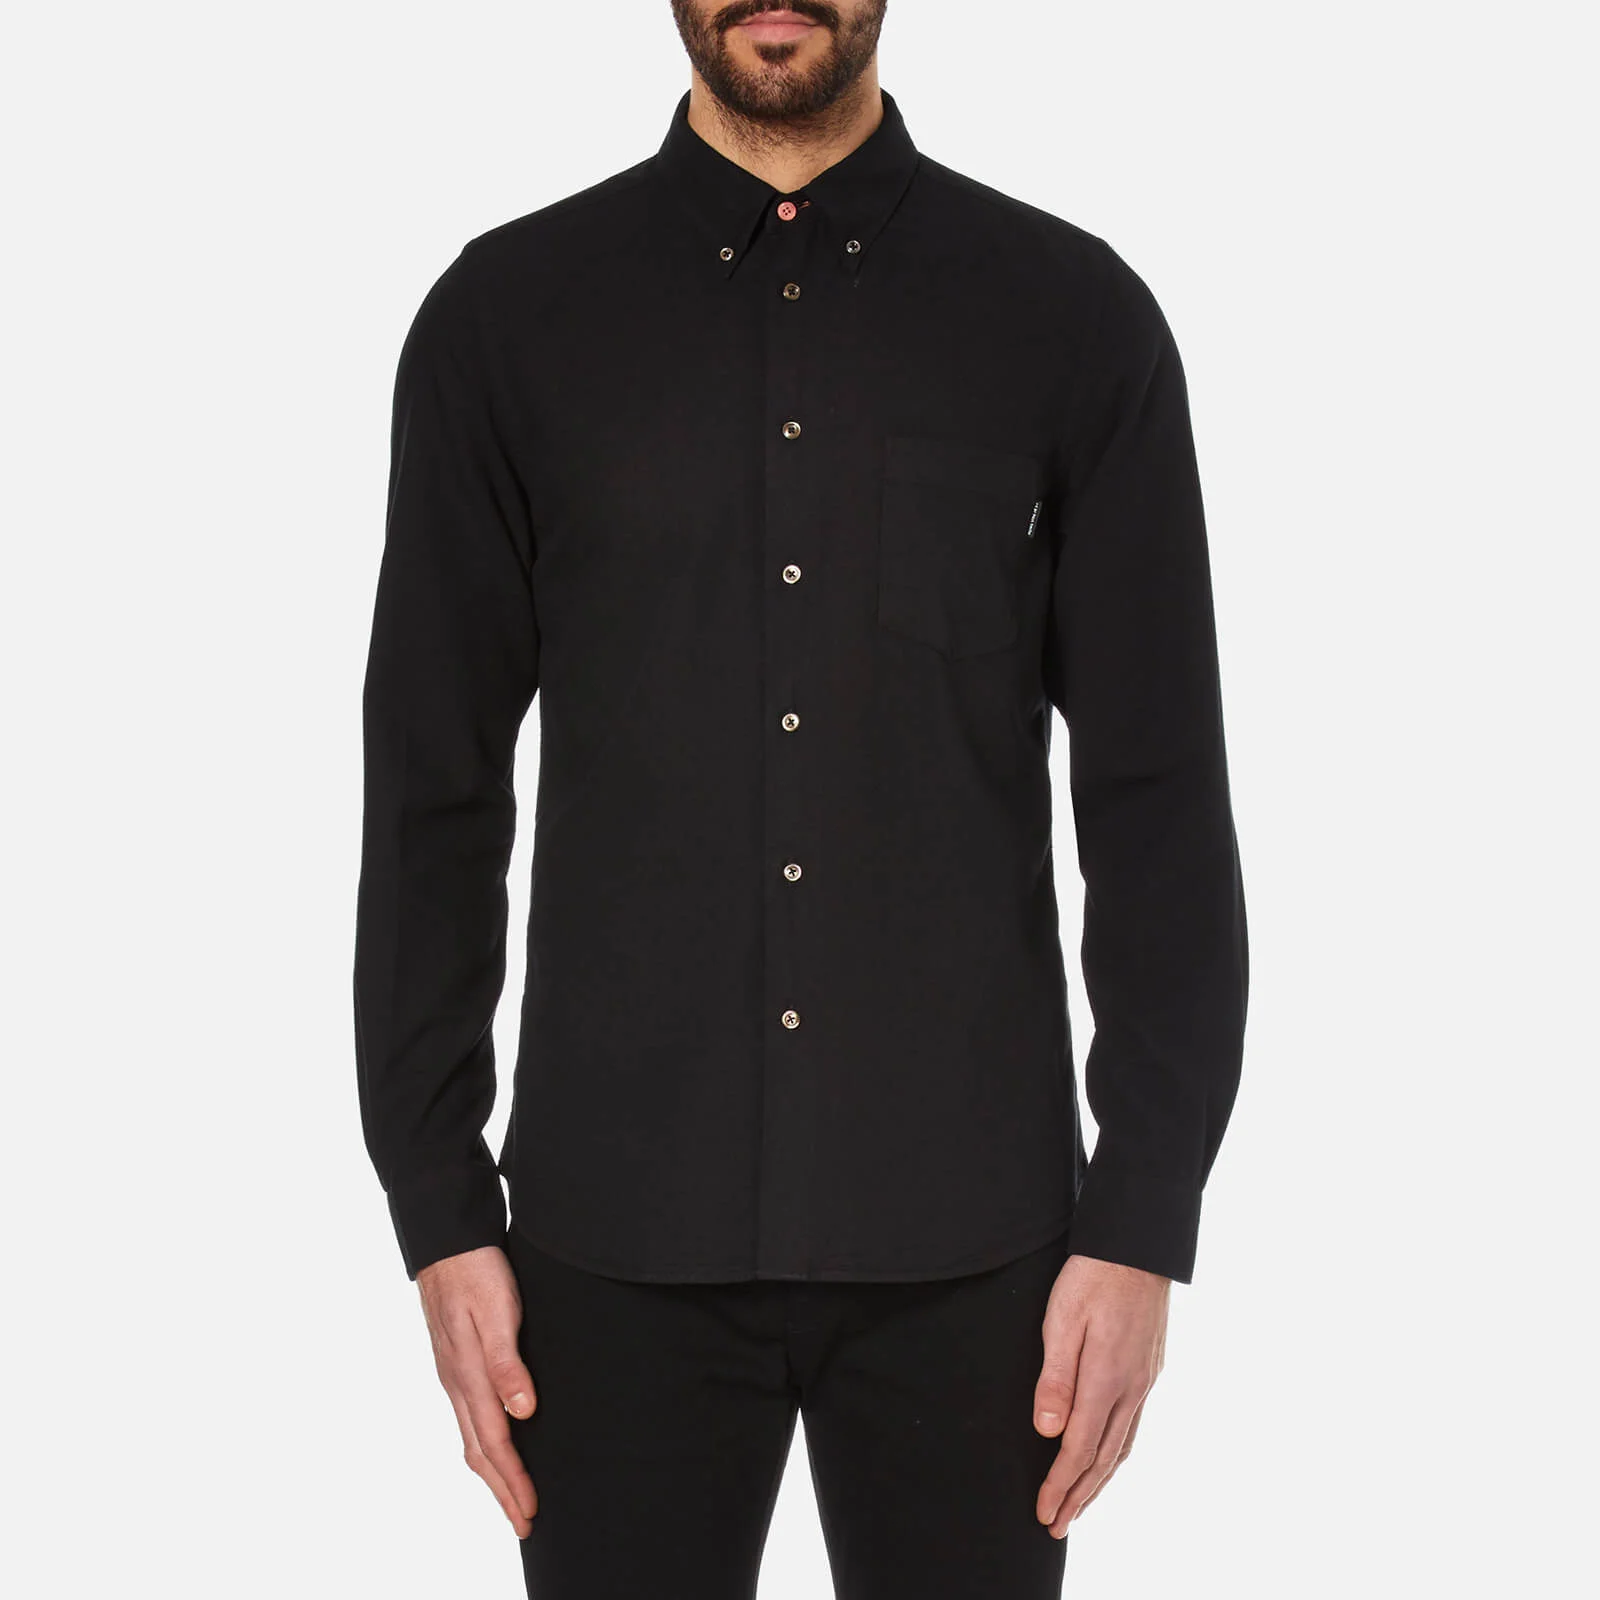 PS by Paul Smith Men's Tailored Fit Long Sleeve Shirt - Black Image 1